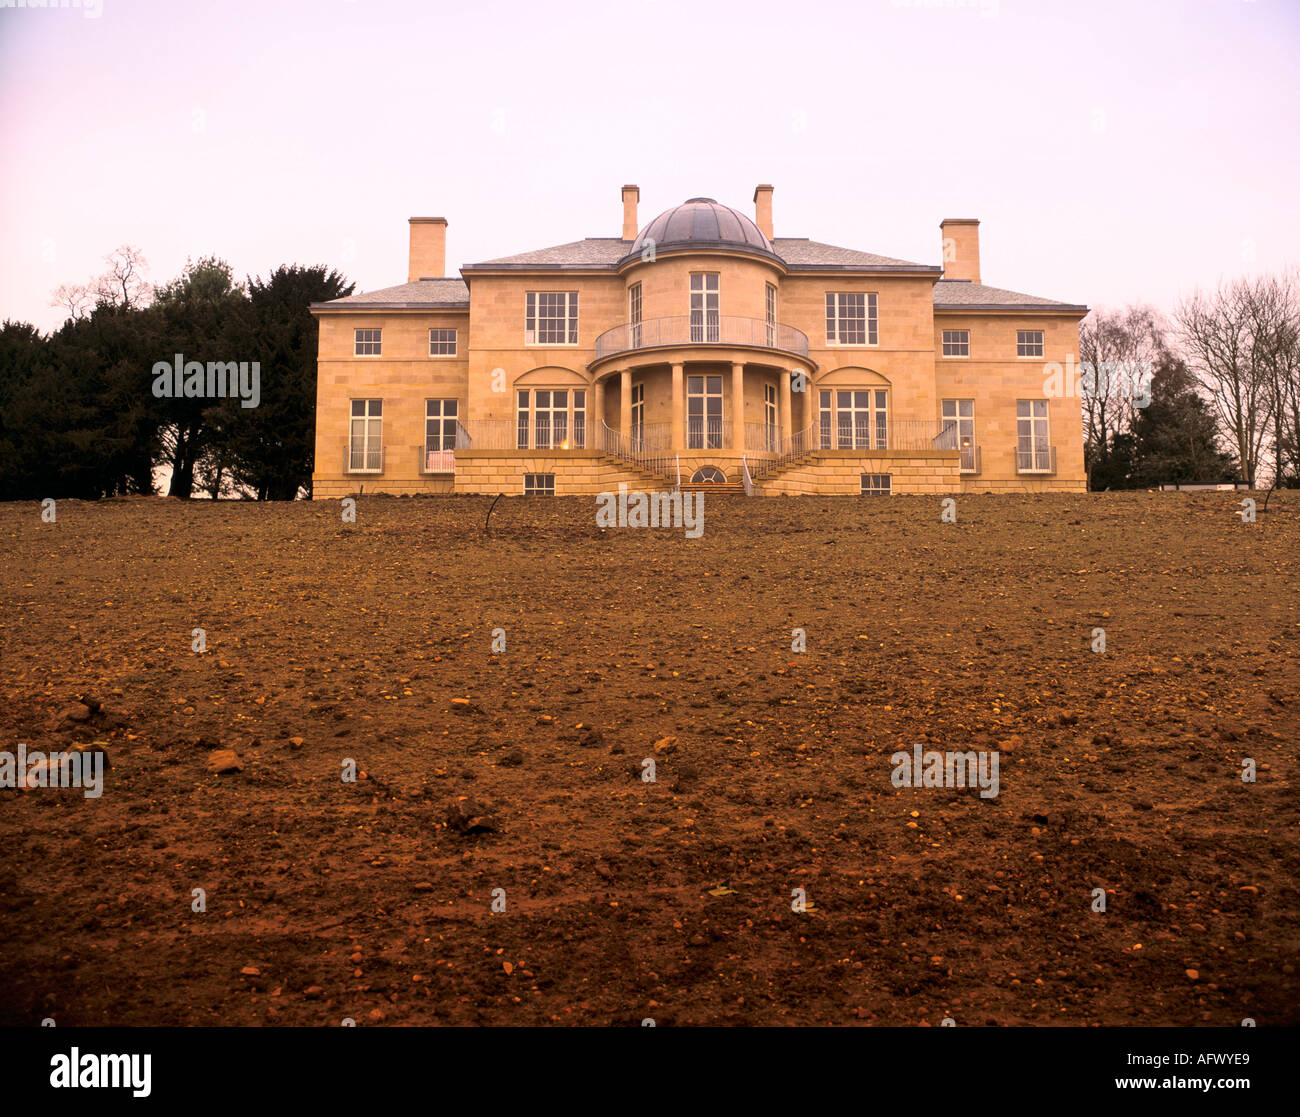 Wootton Hall a 21st century modern country mansion in Derbyshire Designed by Digby Harris and built in local sandstone 2002 2000s UK HOMER SYKES Stock Photo